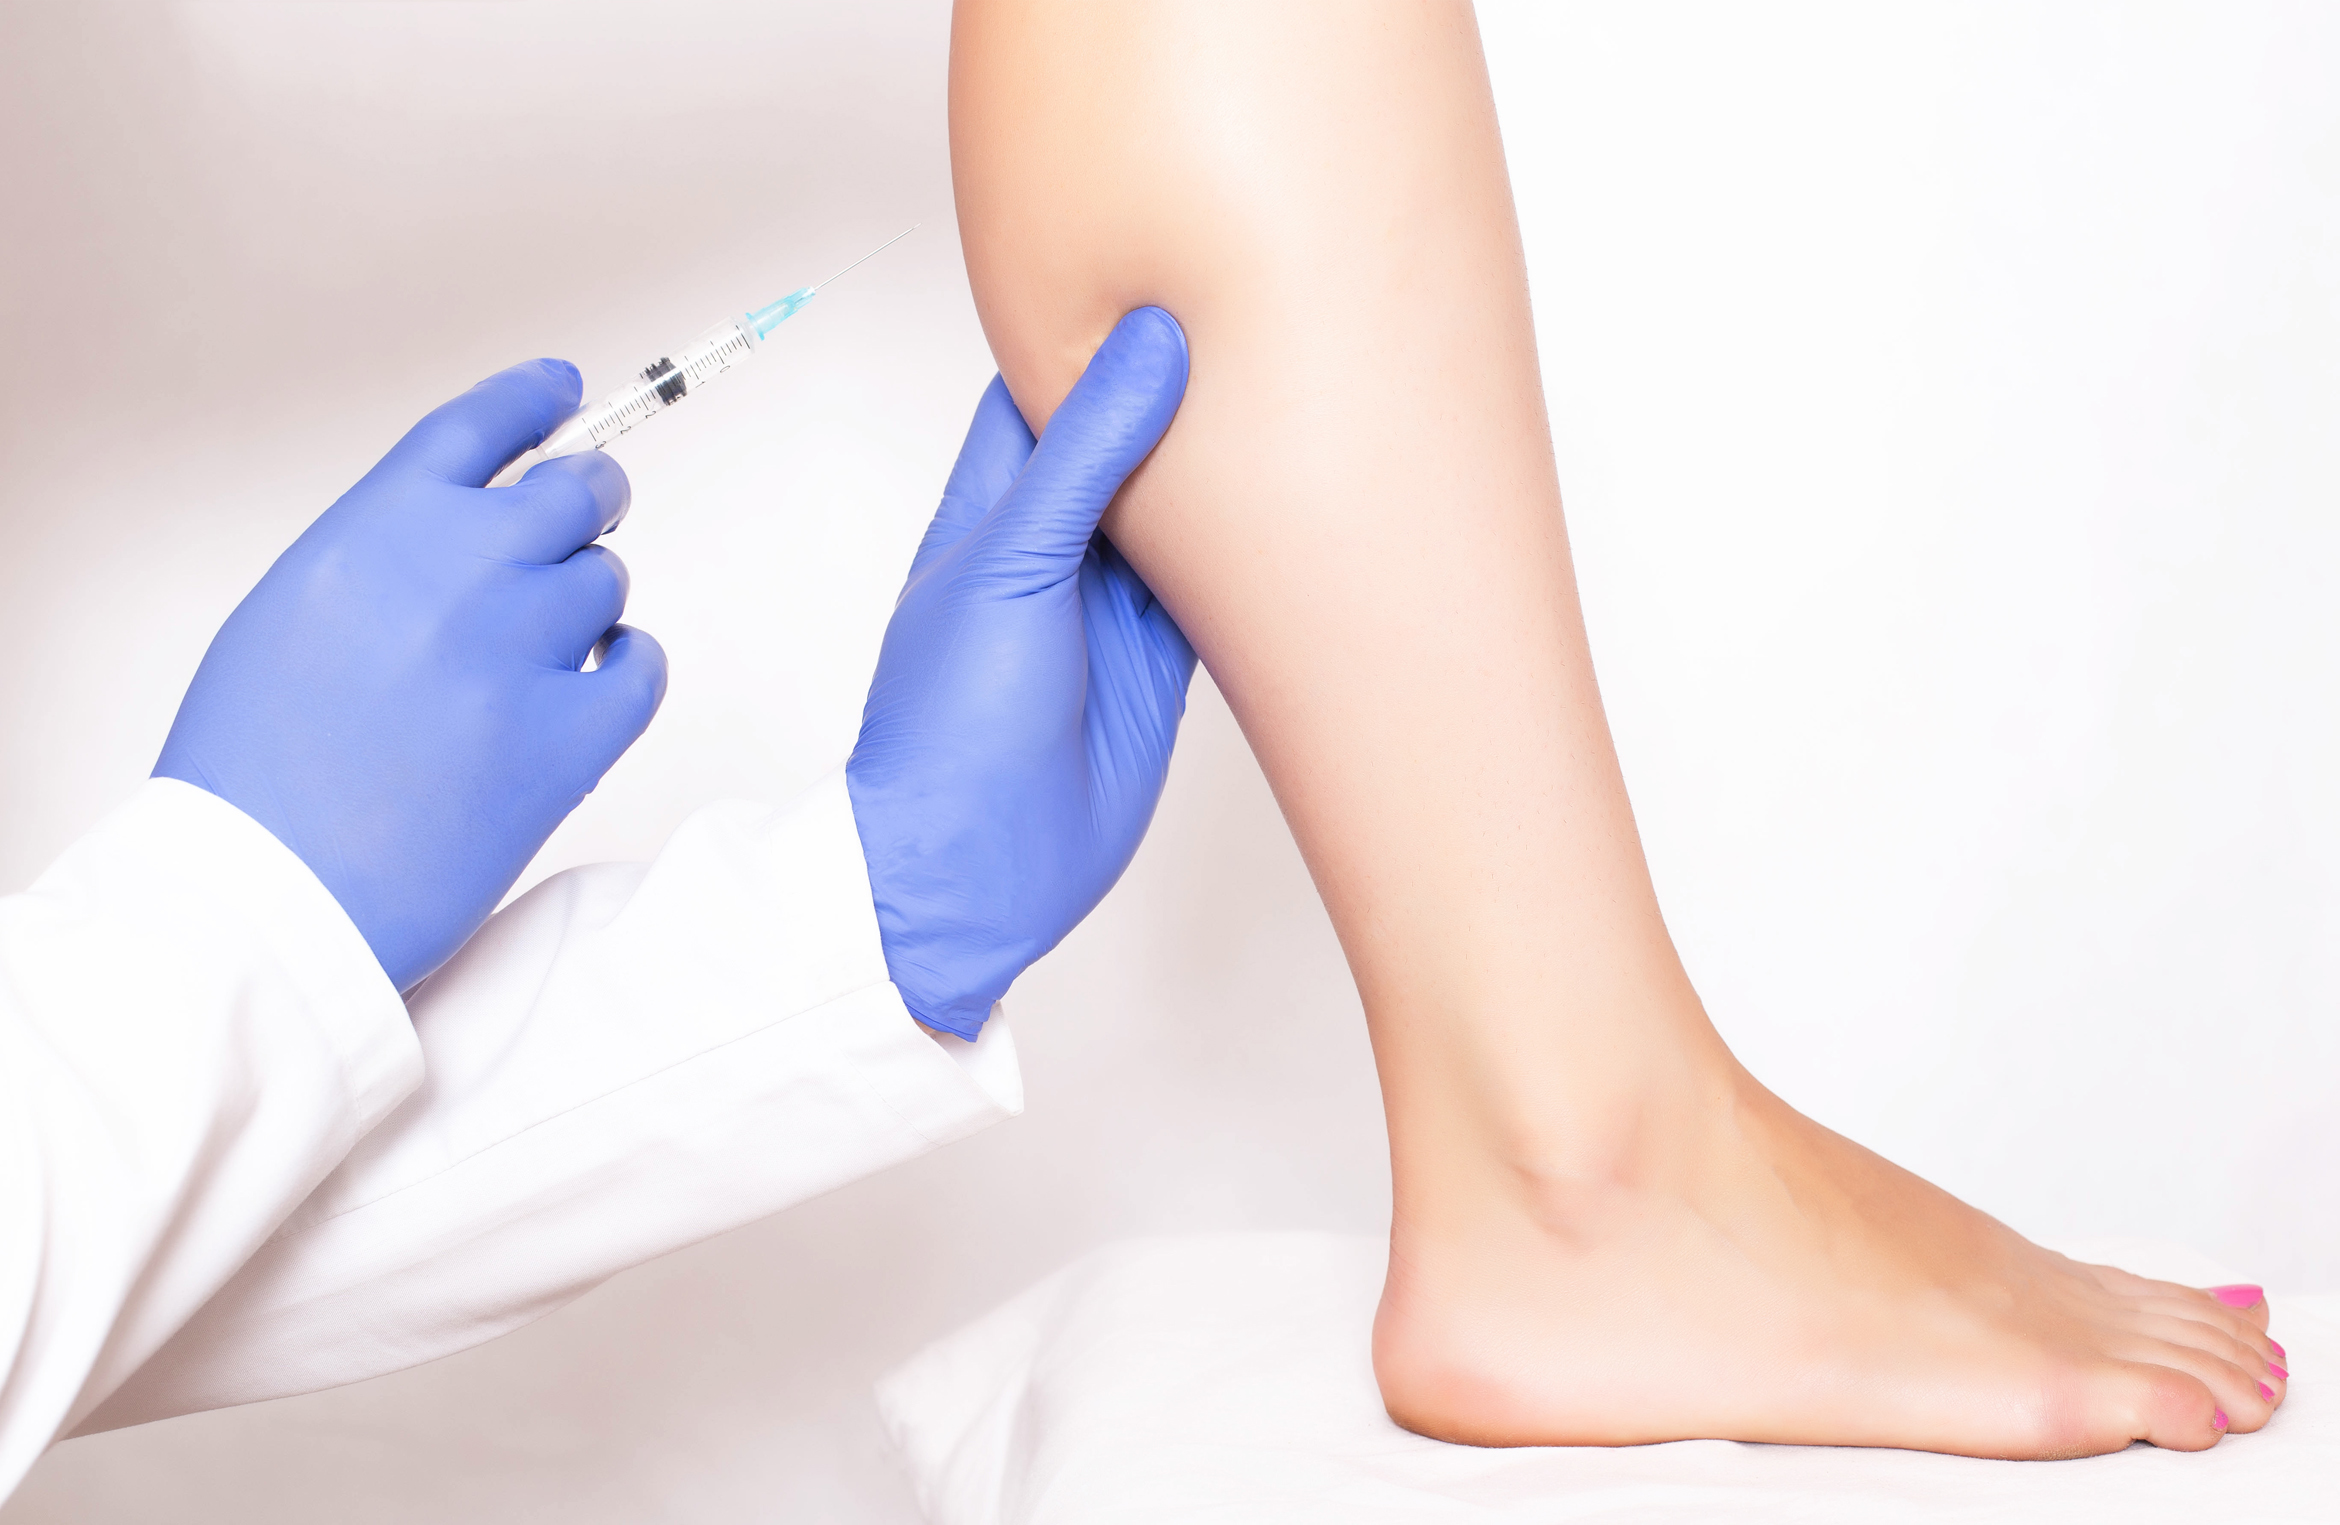 Calf Reduction by Botox Injections